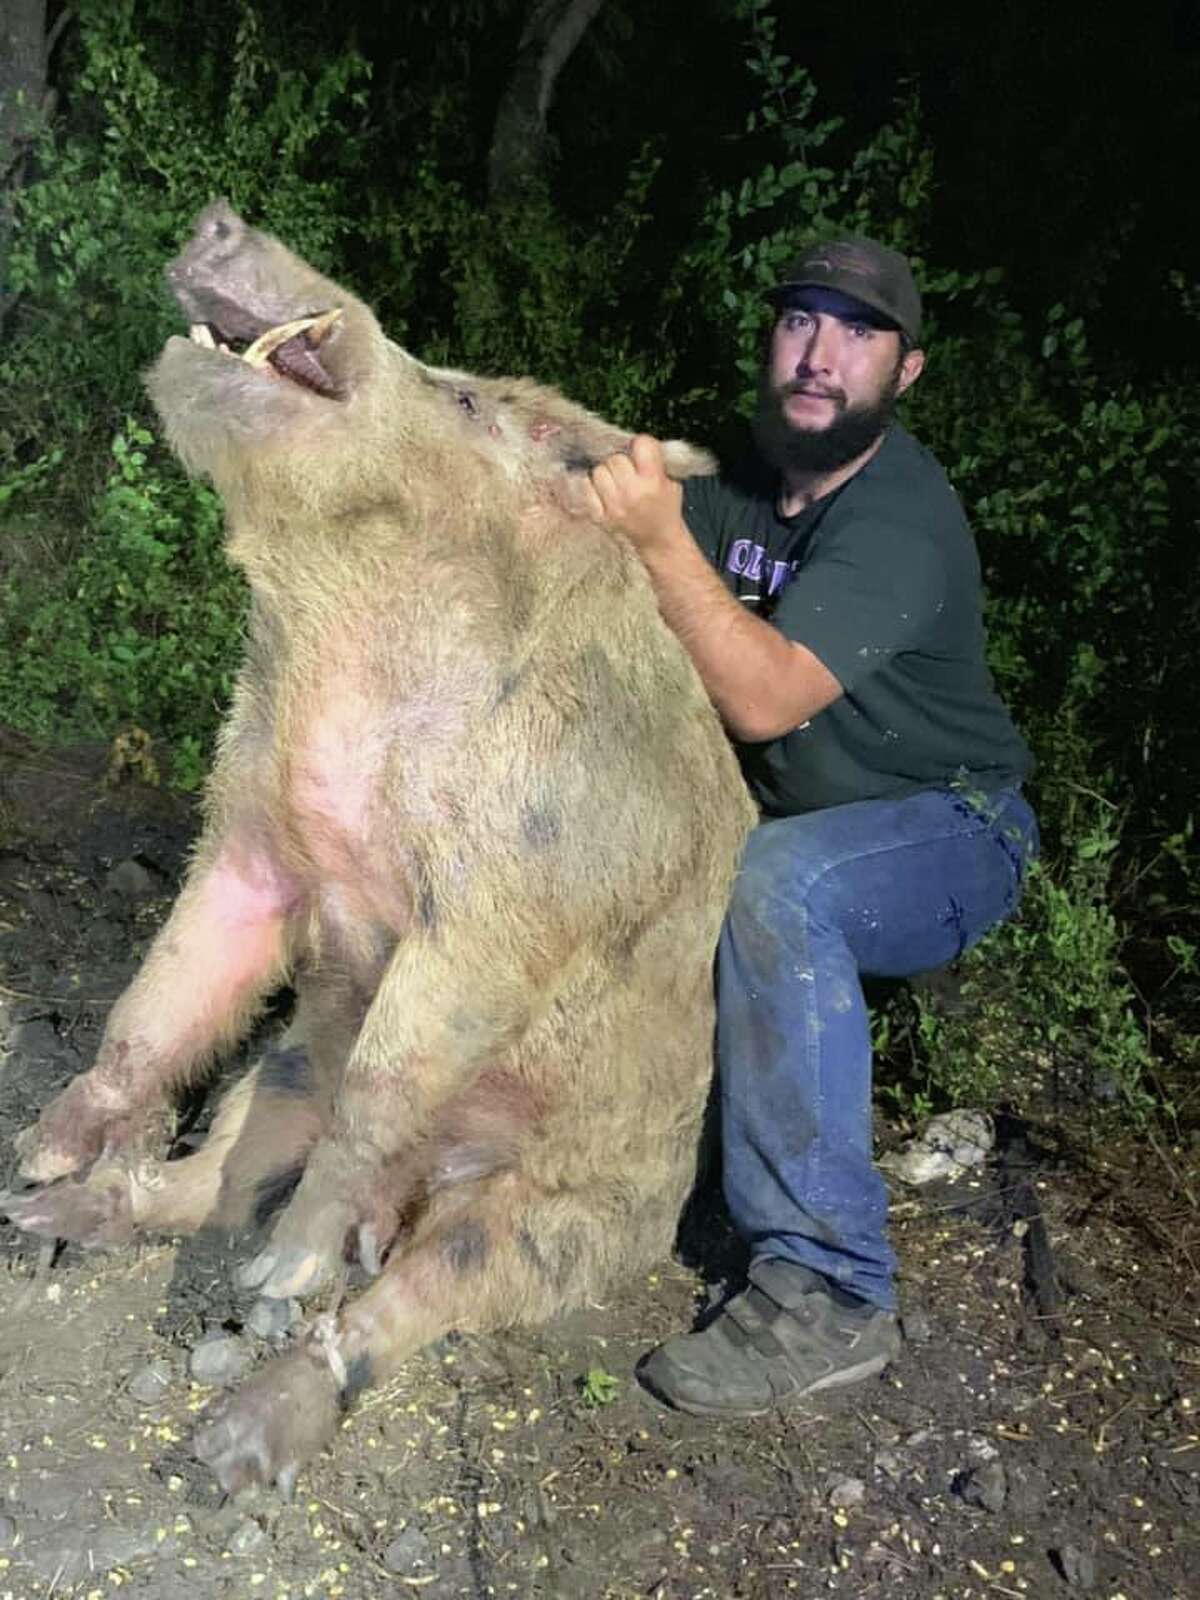 A wild 411-pound feral boar was found and removed from a golf course located on the city's West Side last week.